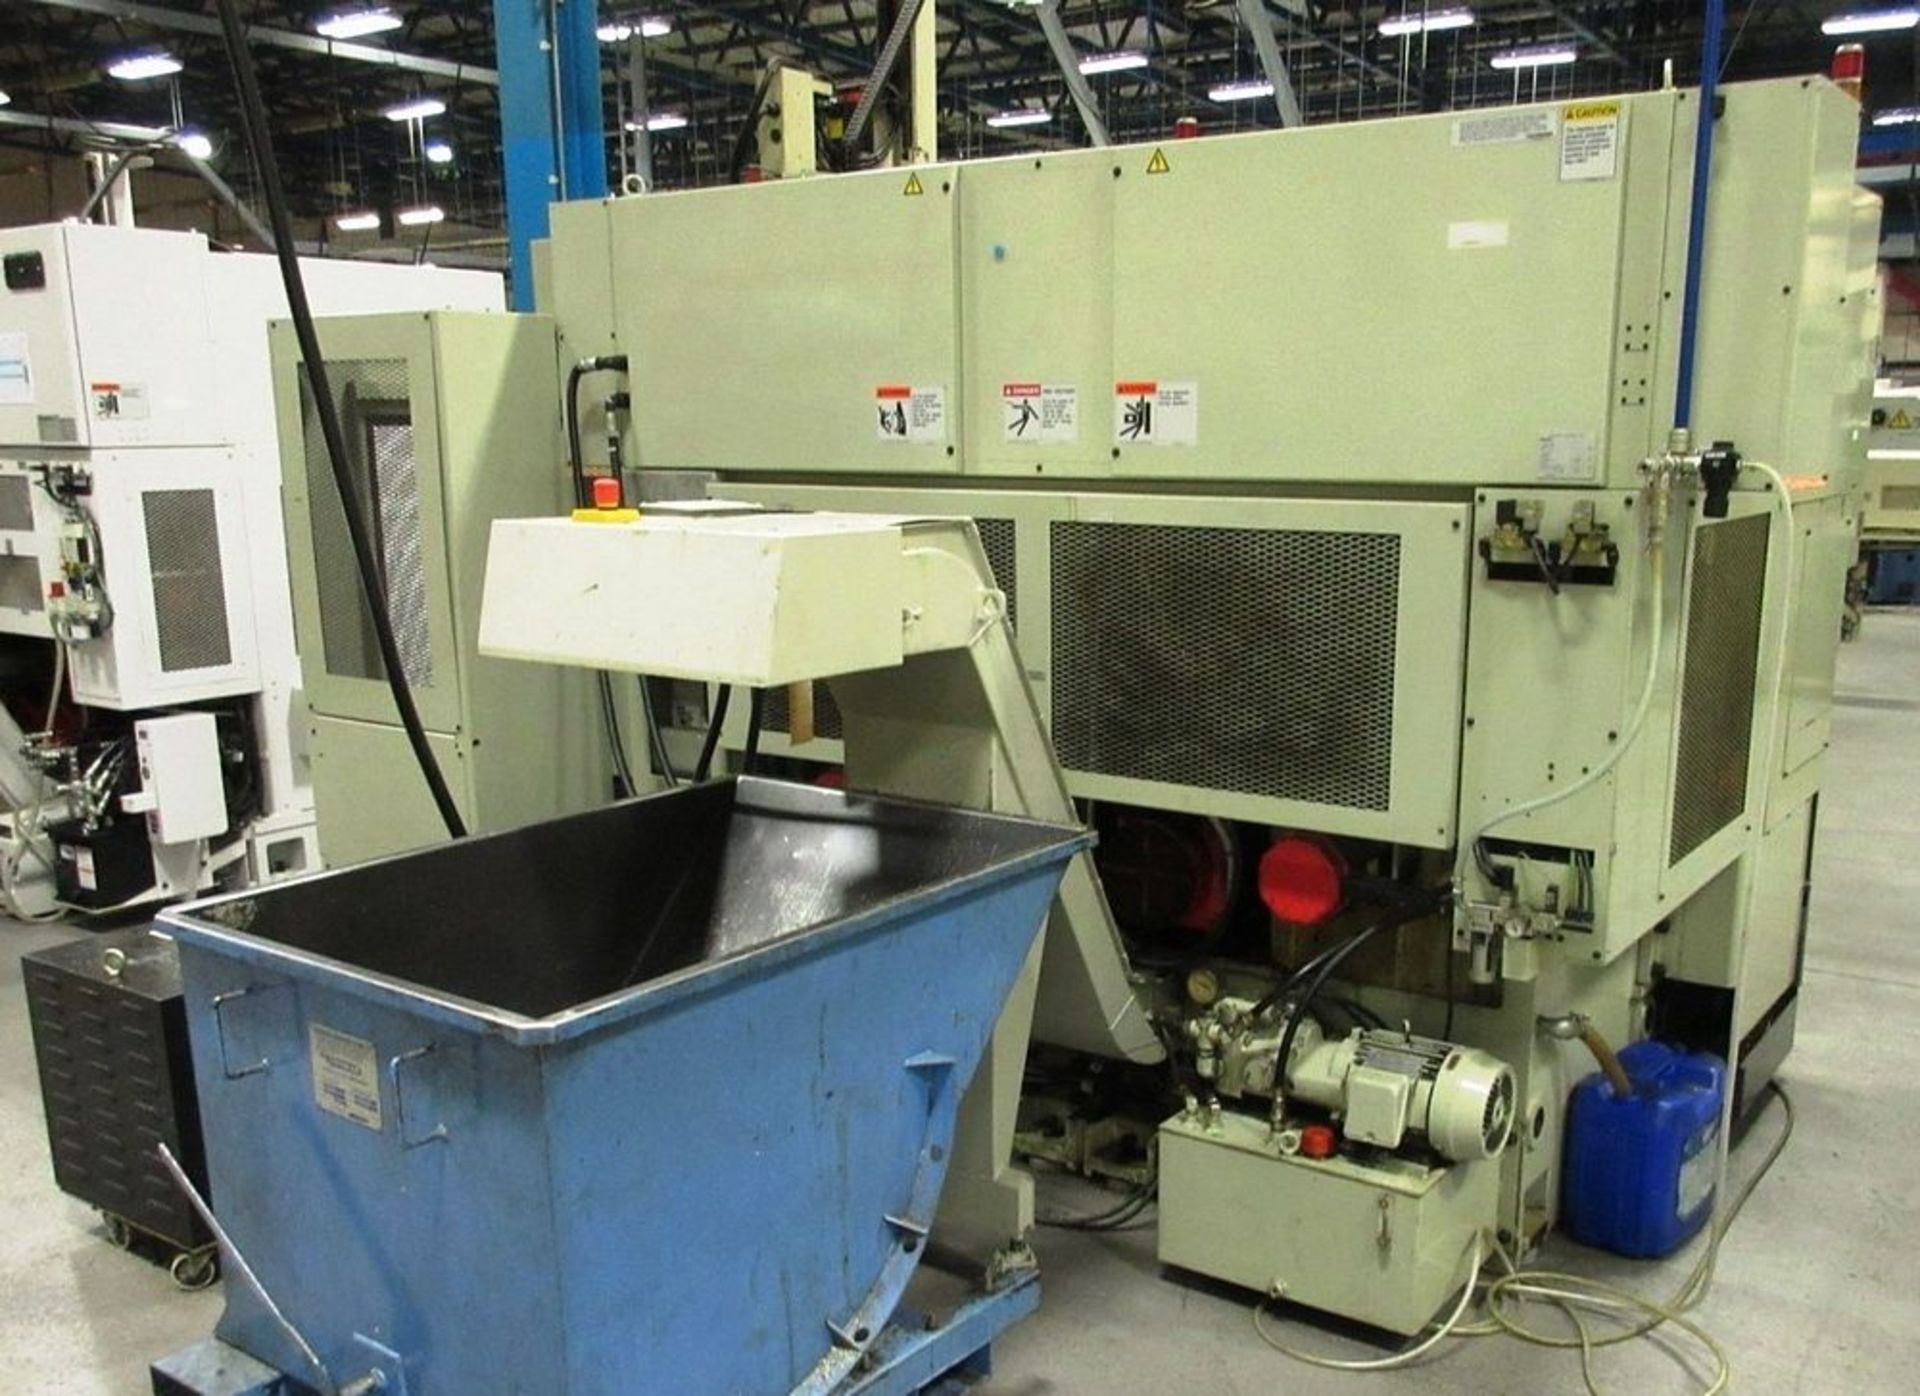 Takisawa TT-200-G CNC Twin Spindle Turning Center w/gantry Loader, Fanuc 21iTB CNc Control C-Axis, L - Image 11 of 14